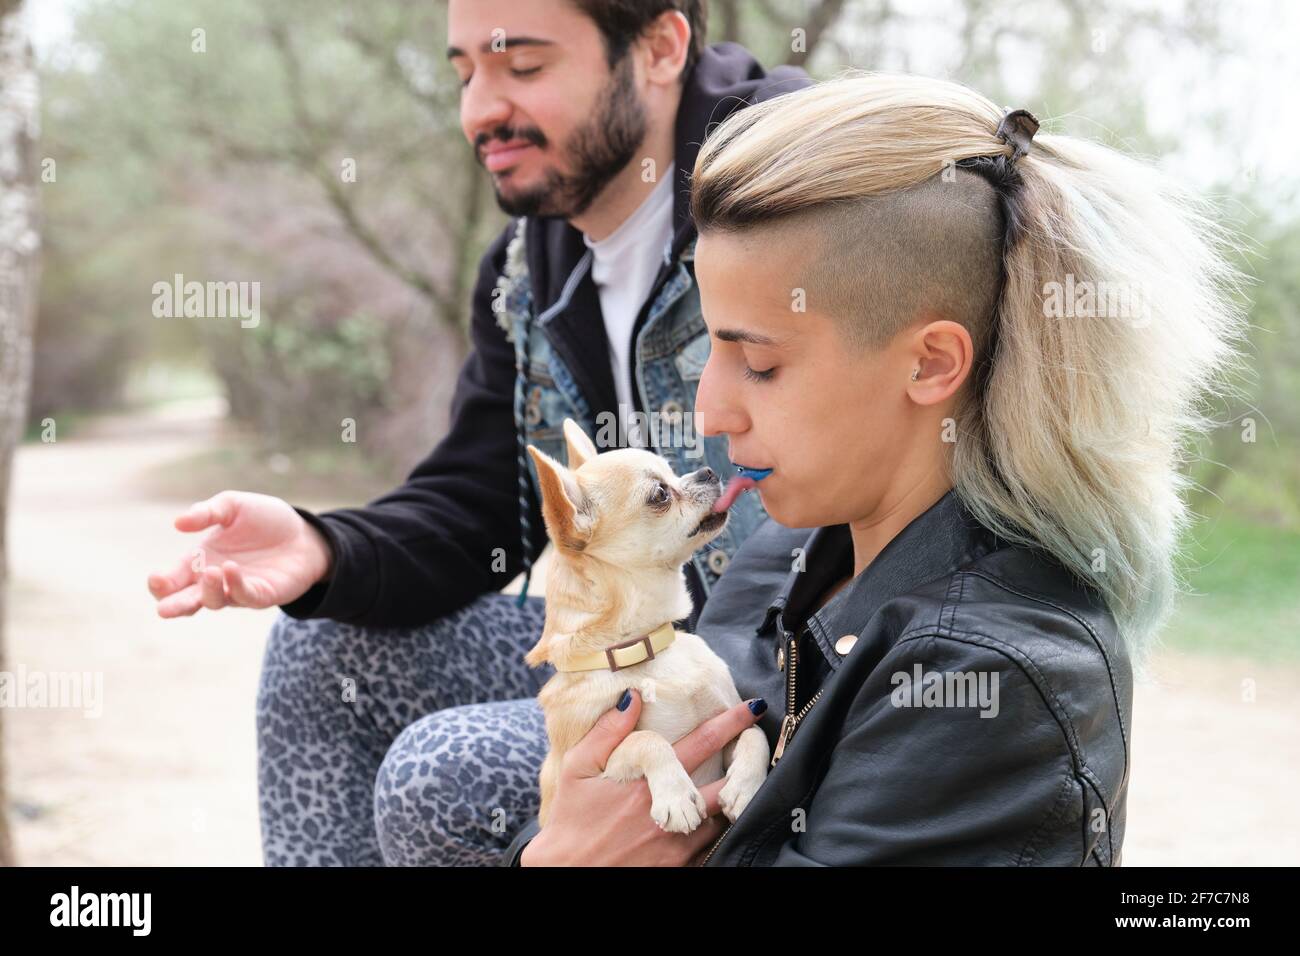 Chihuahua licking her owners mouth and disgusted friend beside. Young punk couple in a park. Stock Photo